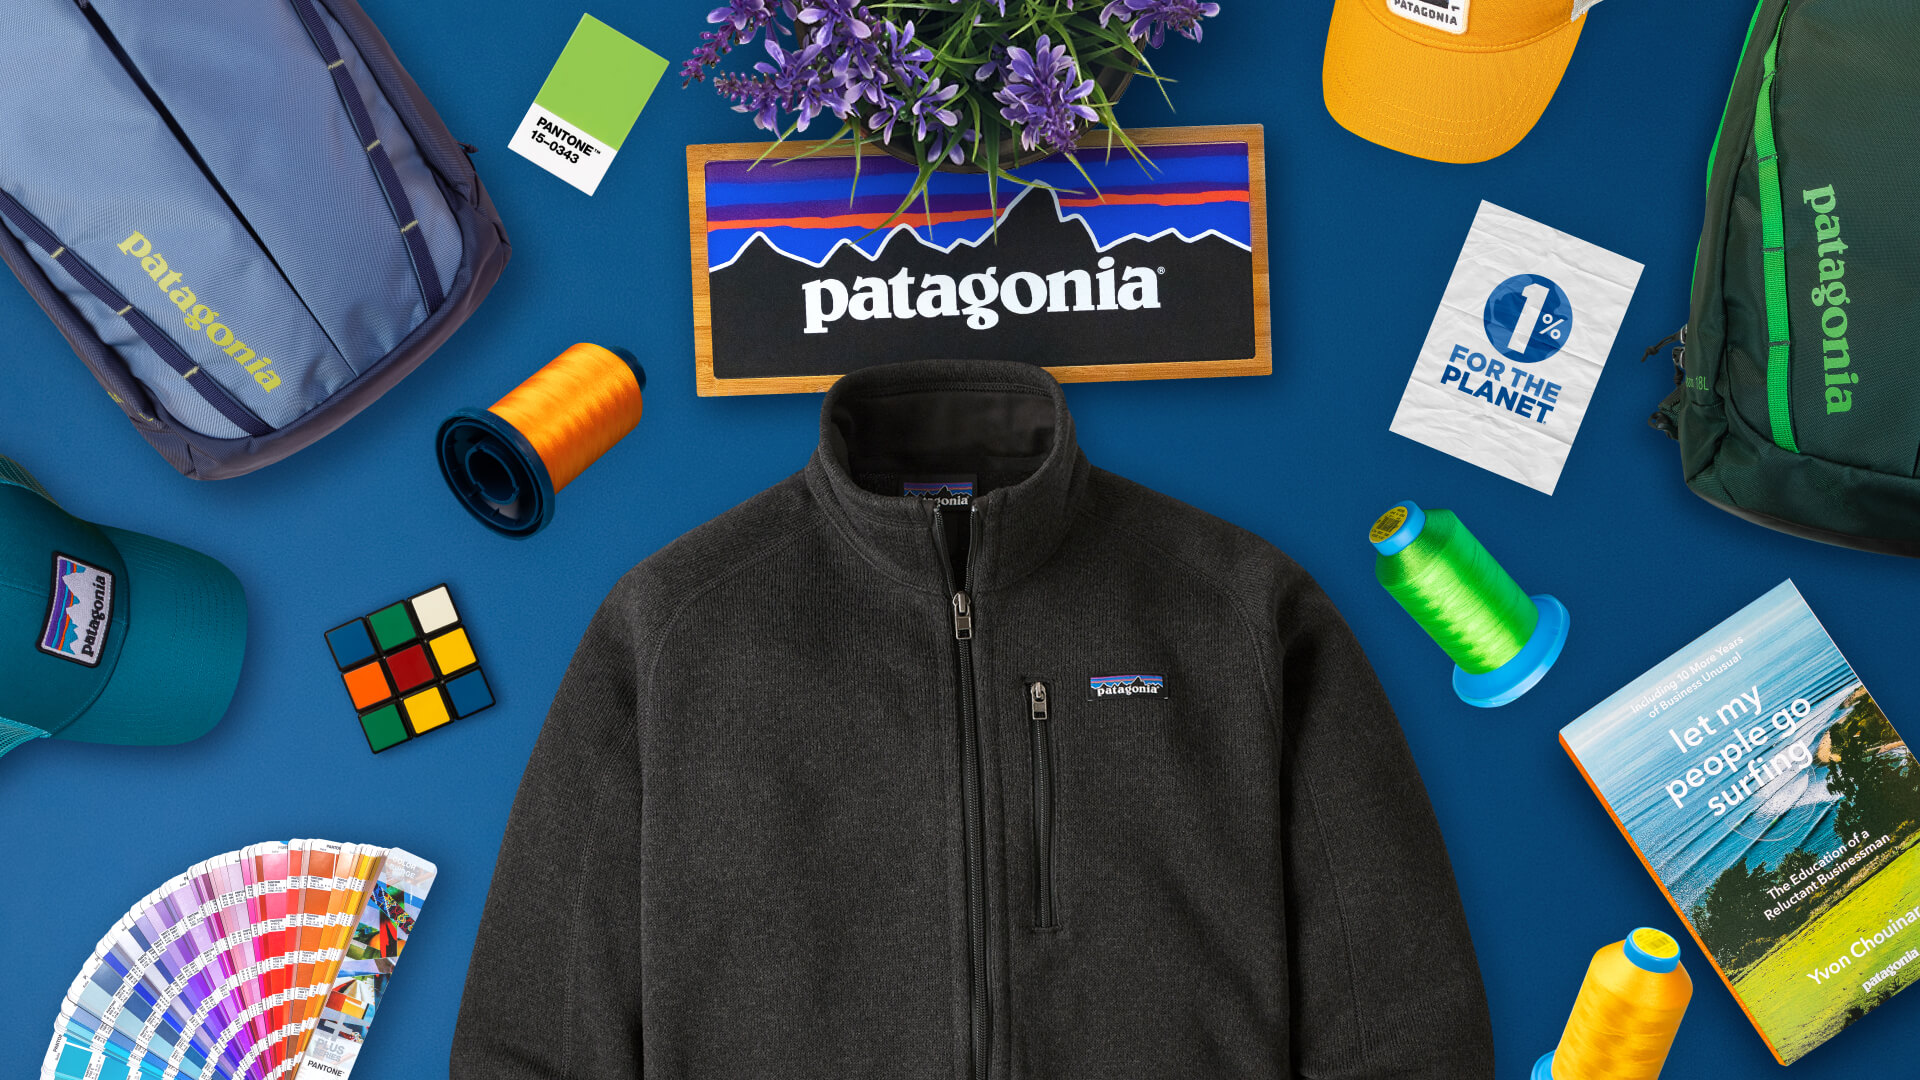 Branded Patagonia Company Uniforms are a Thing of the Past